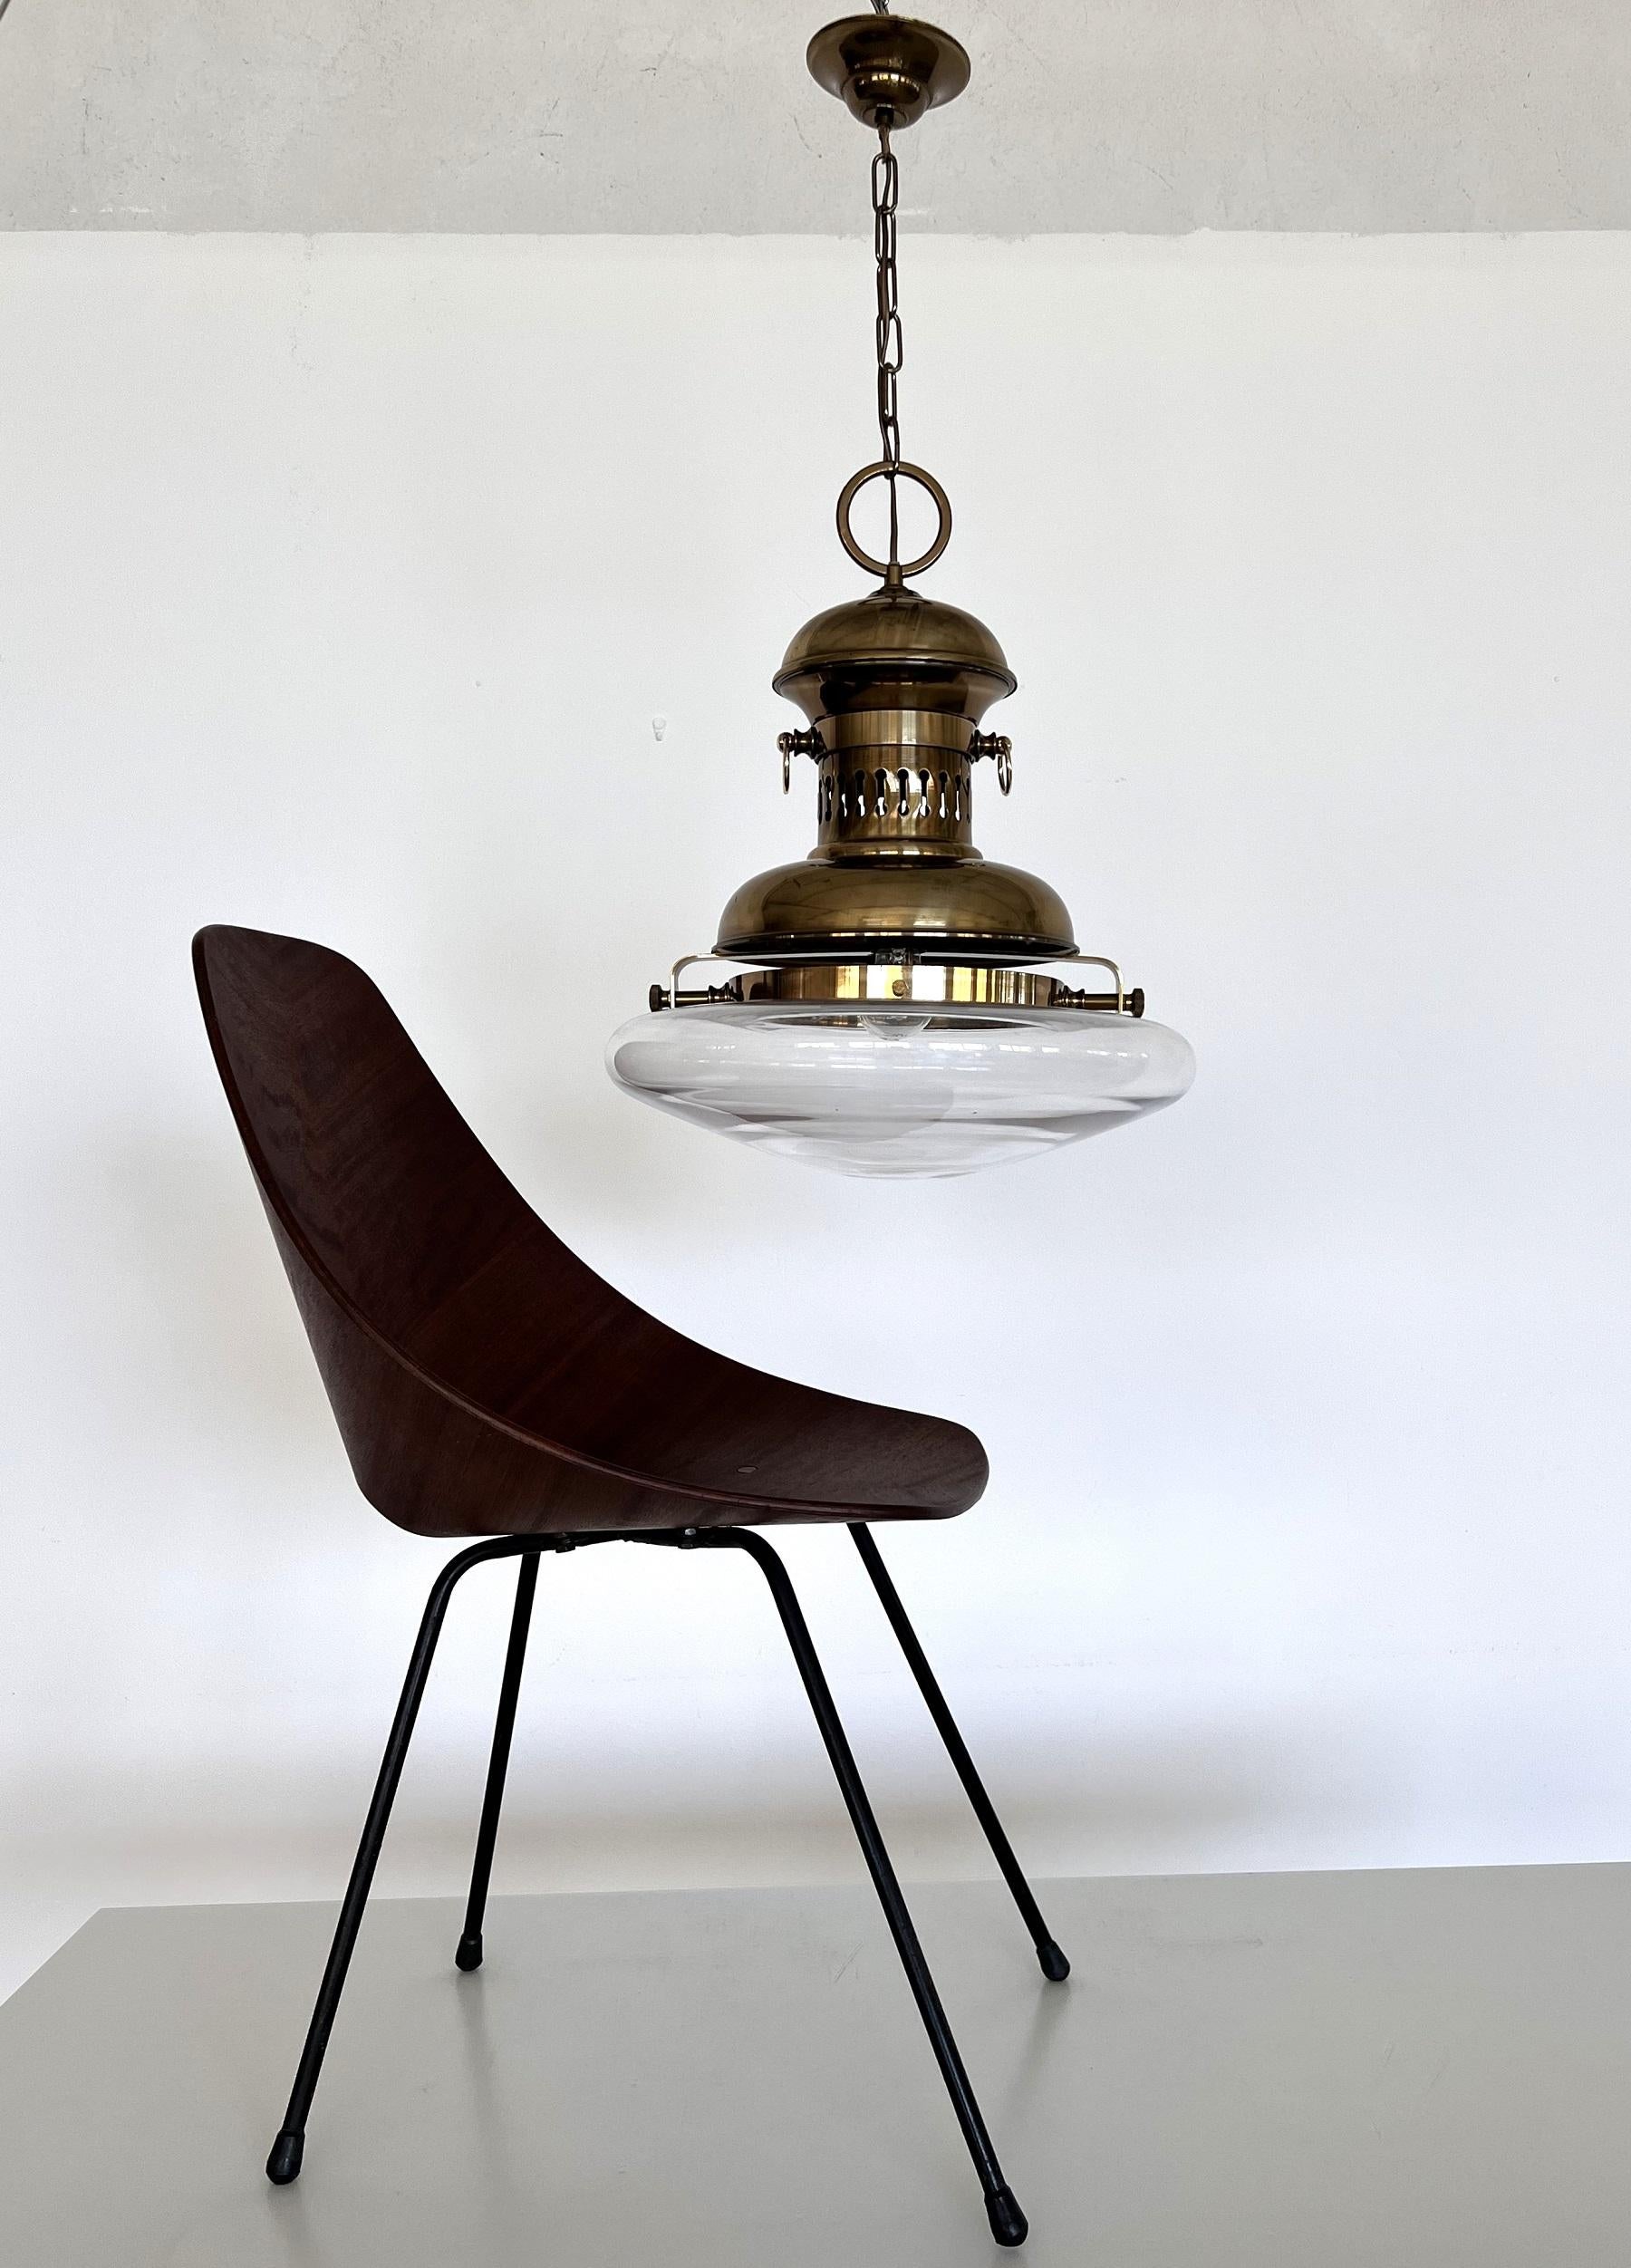 Mid-Century Modern Italian Brass and Glass Pendant Lamp or Lantern in Nautical Style, 1970s For Sale